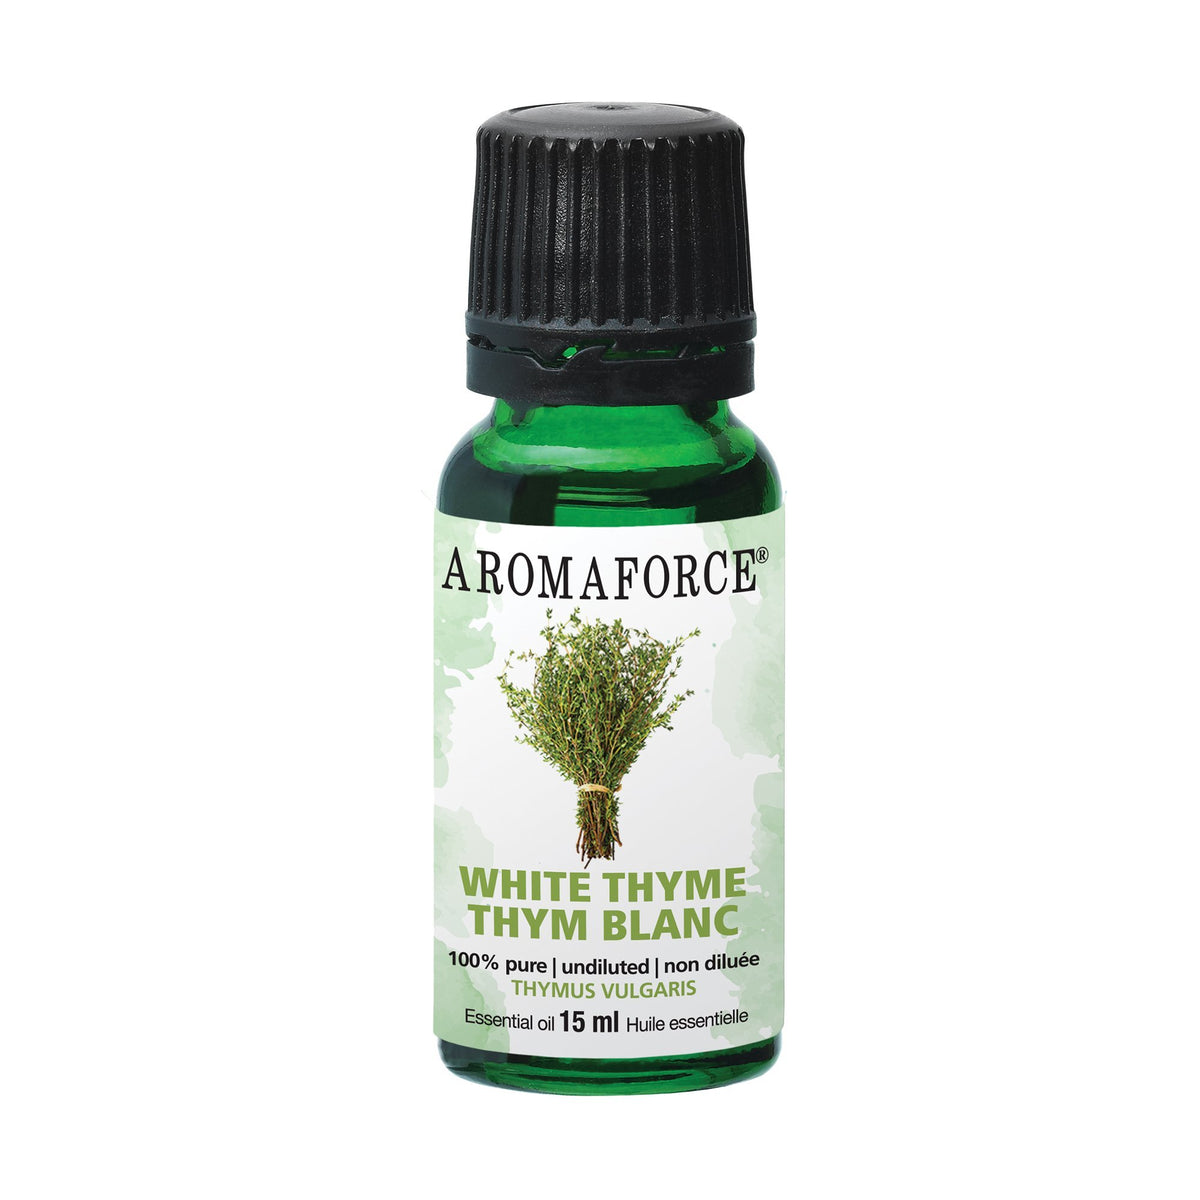 Aromaforce White Thyme Essential Oil 15mL - A.Vogel Canada